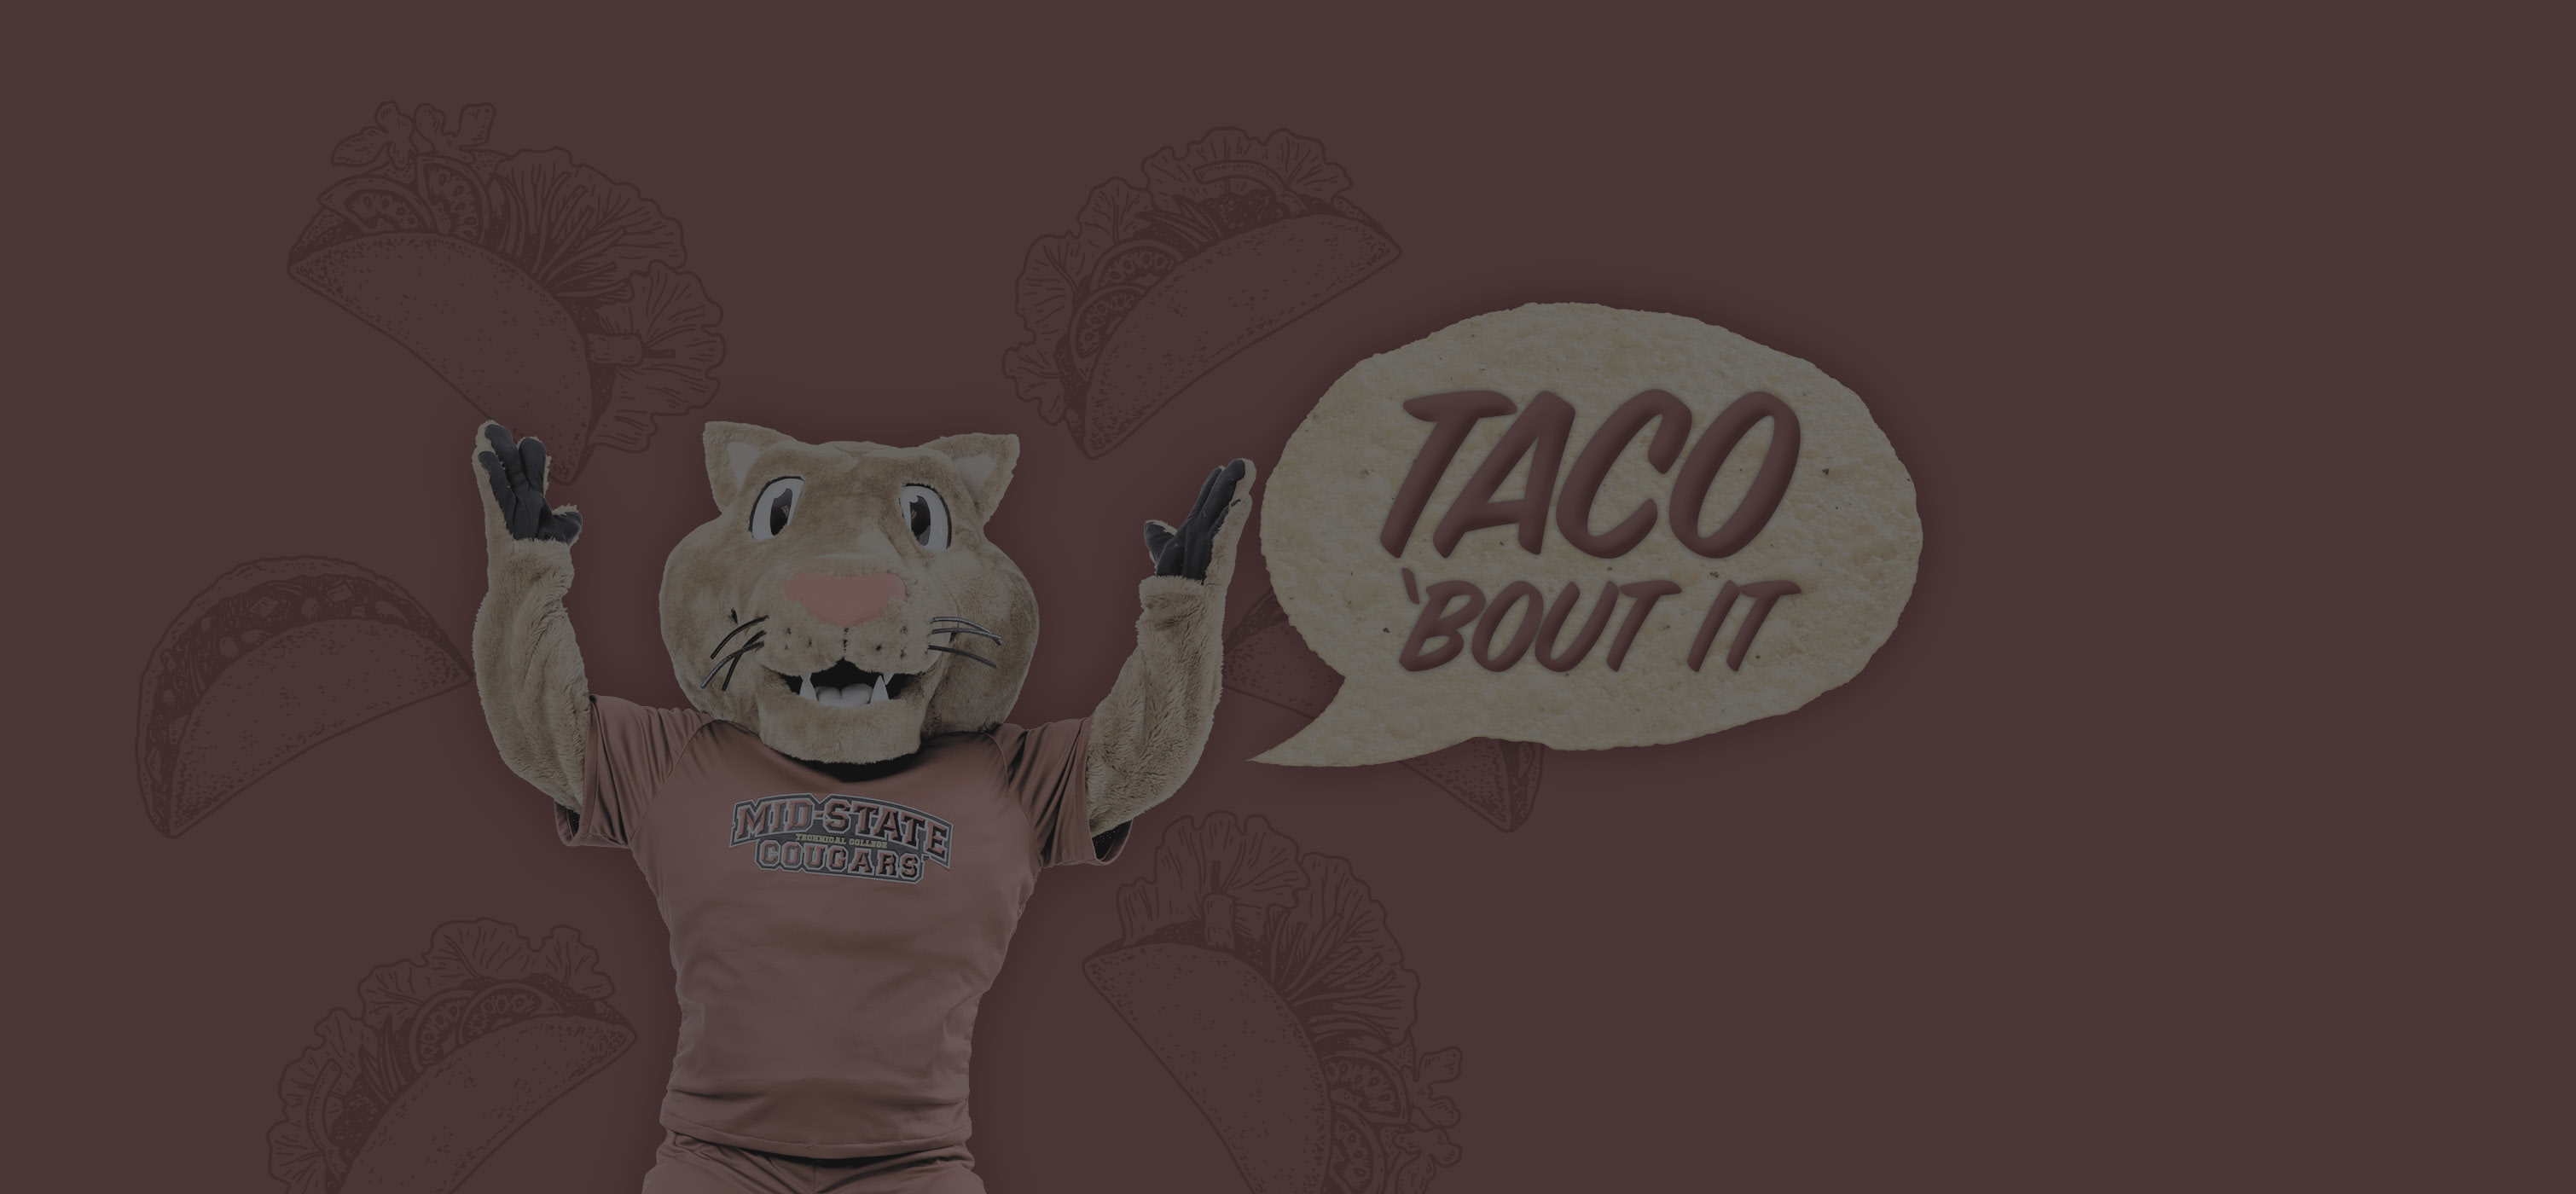 Mid-State Mascot Grit with paws in air. "Taco 'Bout it" in a speech bubble textured as a tortilla next to grit.